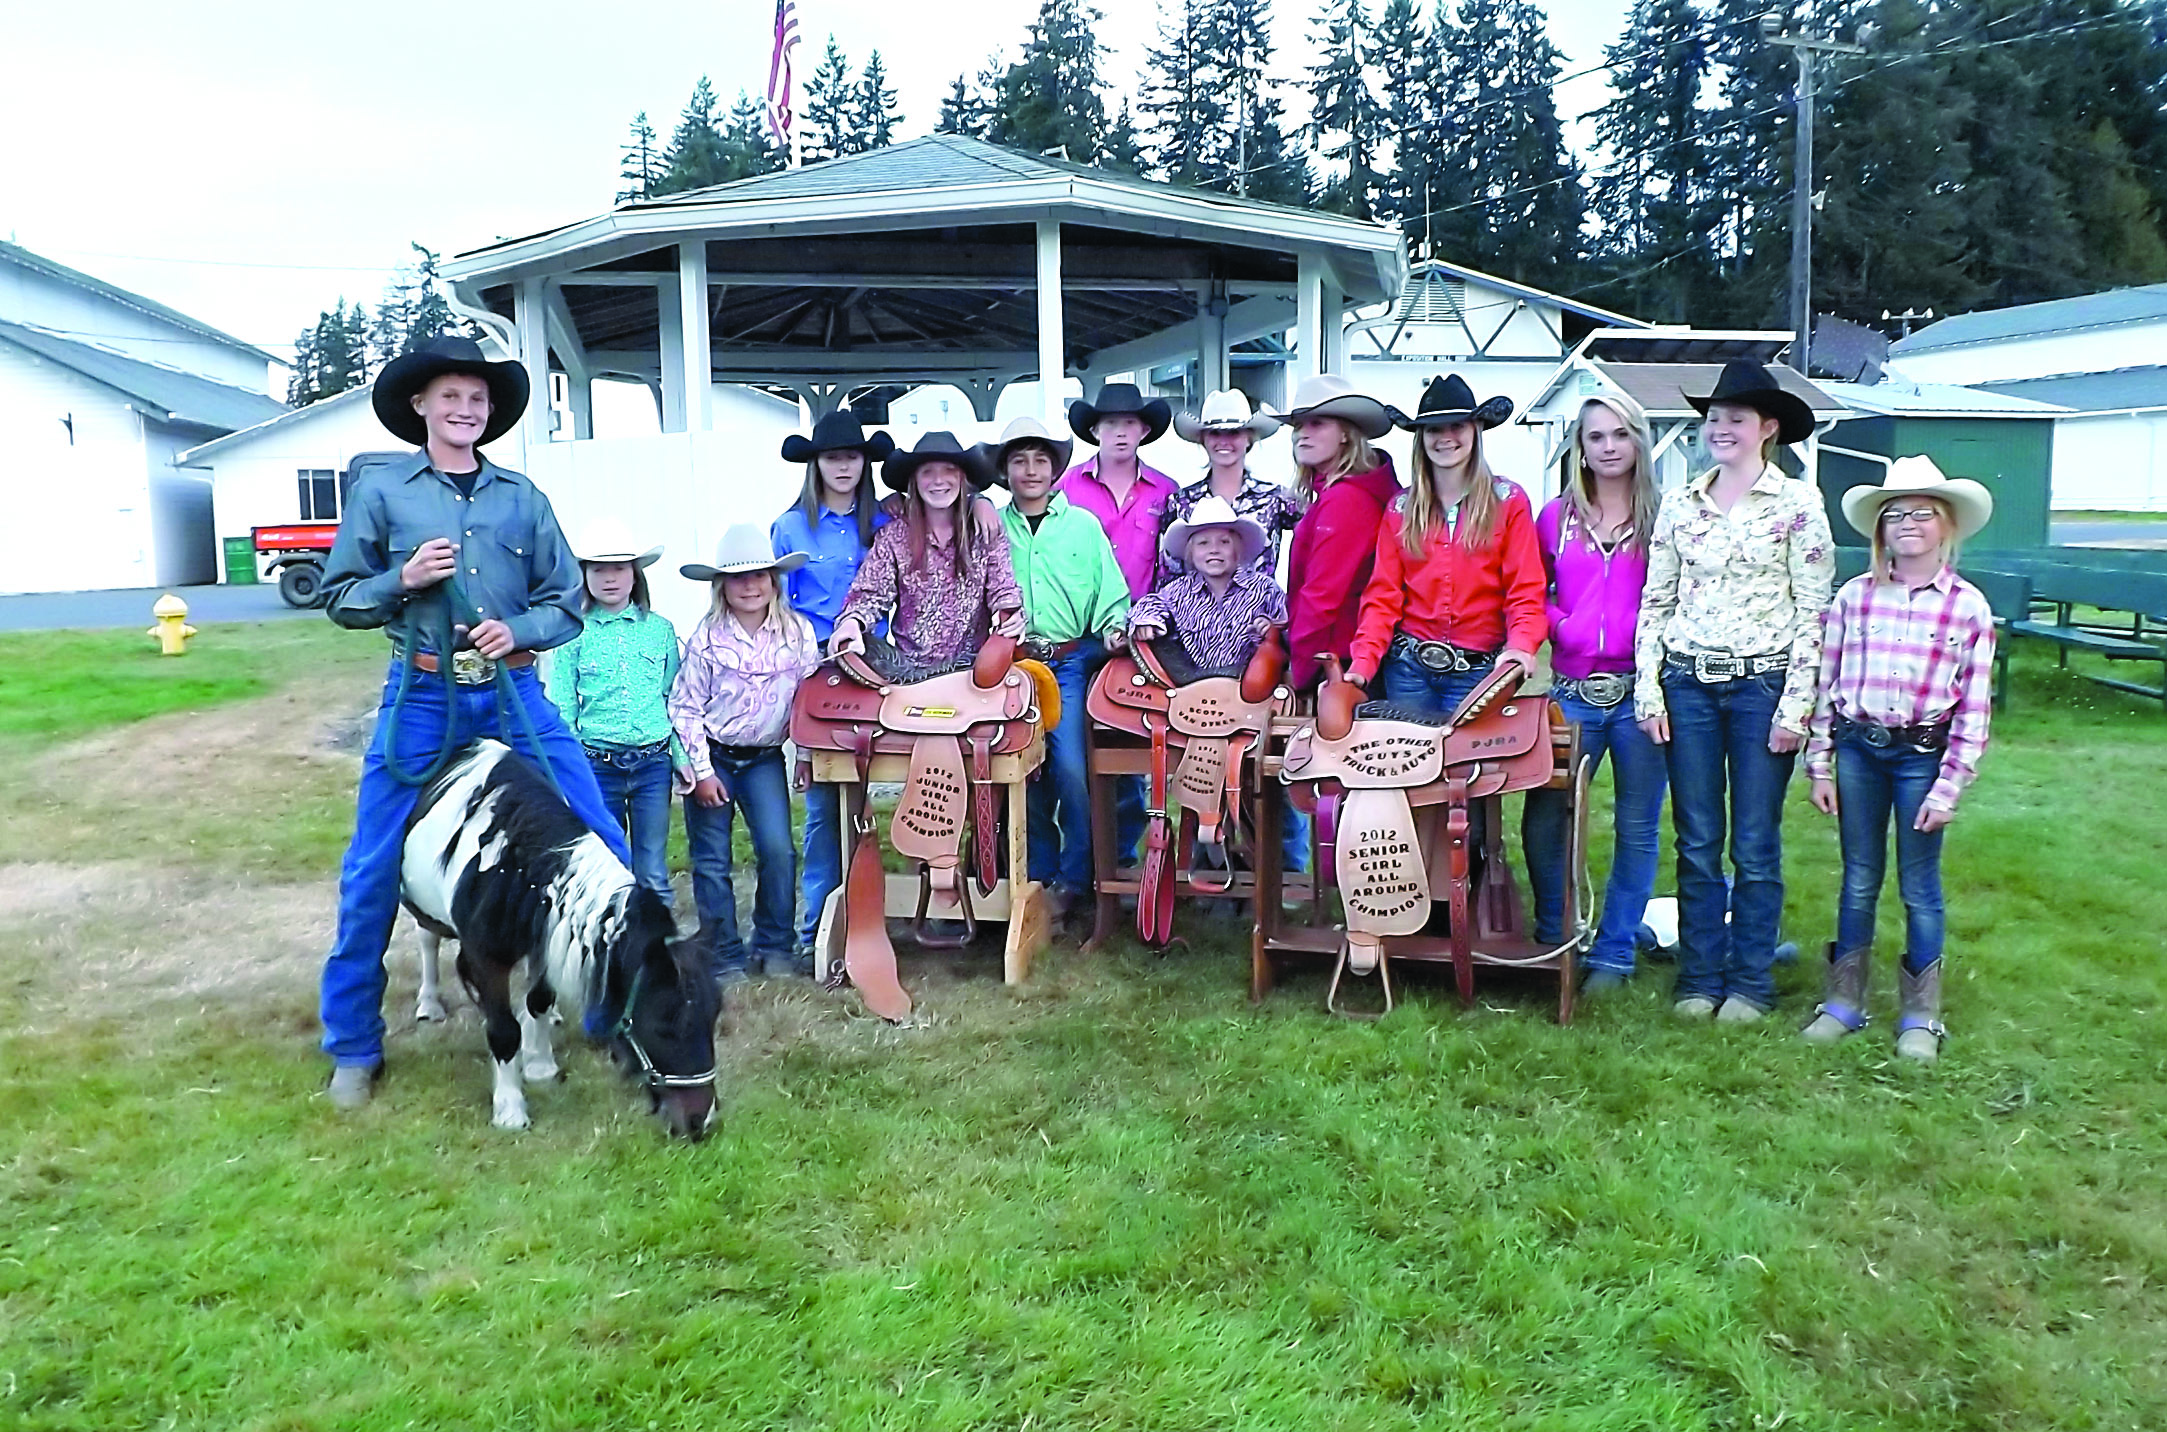 The Peninsula Junior Rodeo team raked in the points at last weekend's rodeo